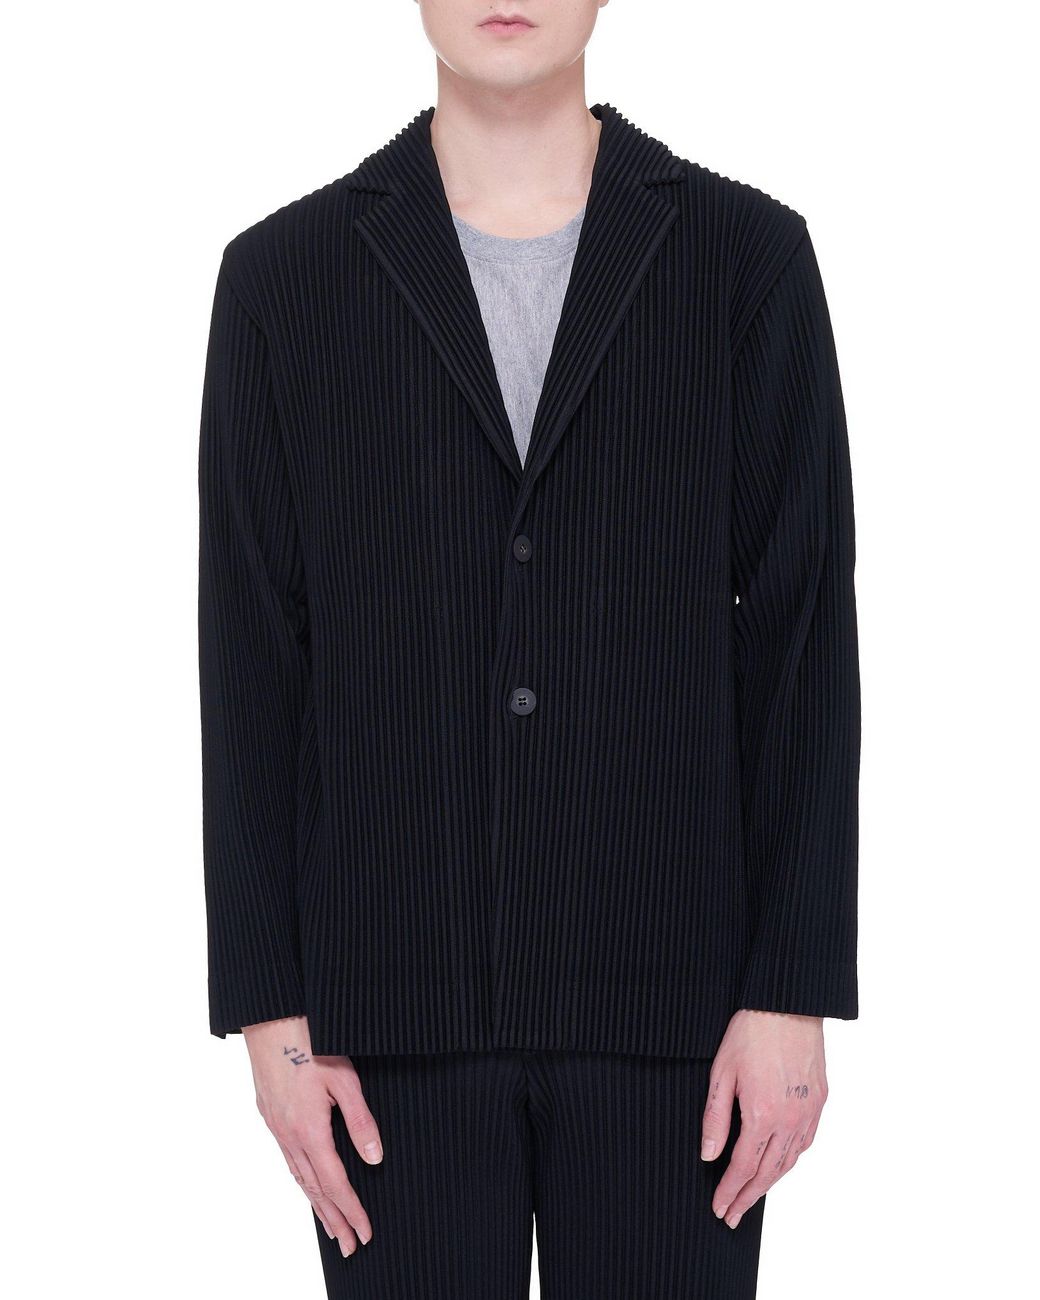 Homme Plissé Issey Miyake Synthetic Pleated Blazer in Black for Men - Lyst